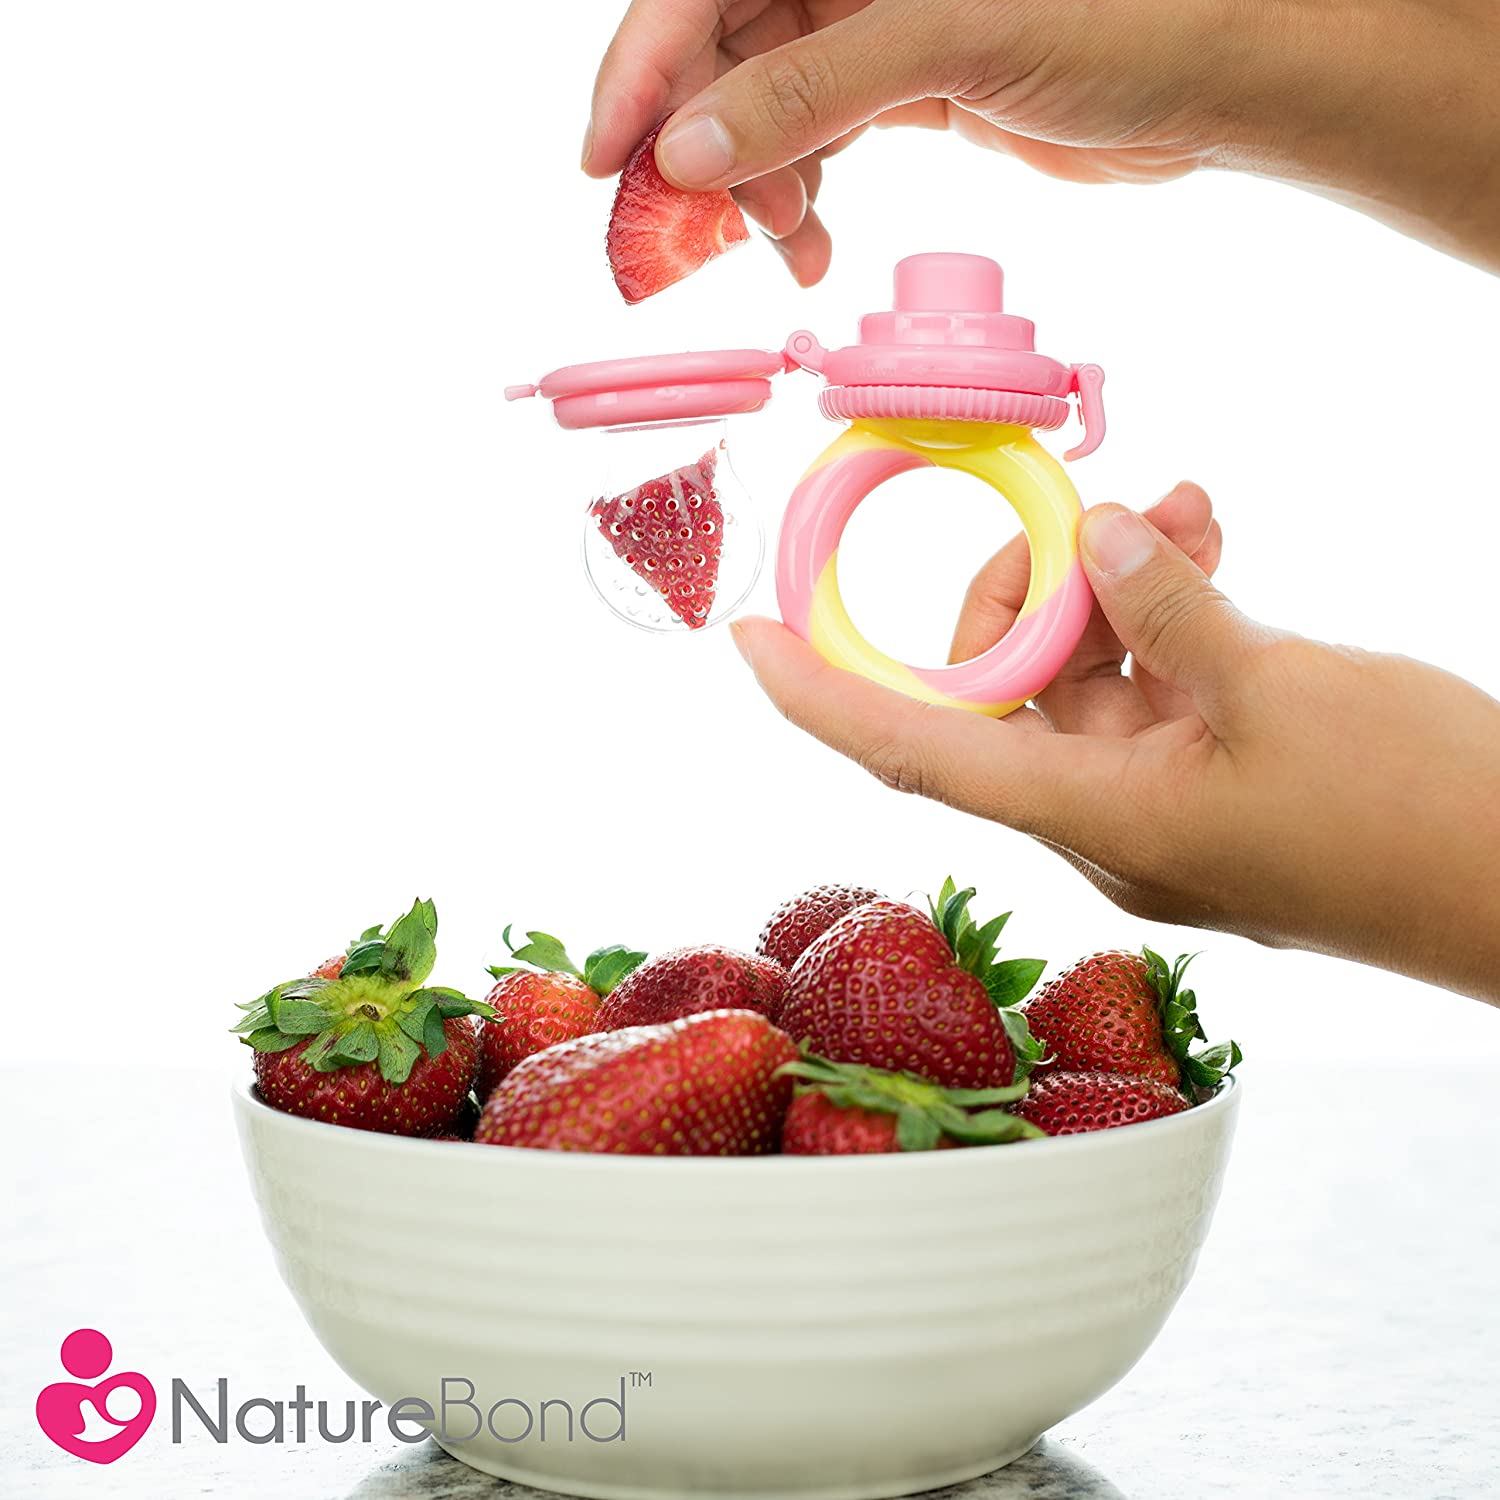 https://discounttoday.net/wp-content/uploads/2021/12/NatureBond-Baby-Food-Feeder-Fruit-Feeder-Pacifier-2-Pack-Infant-Teething-Toy-Teether-Includes-Additional-Silicone-Sacs5.jpg